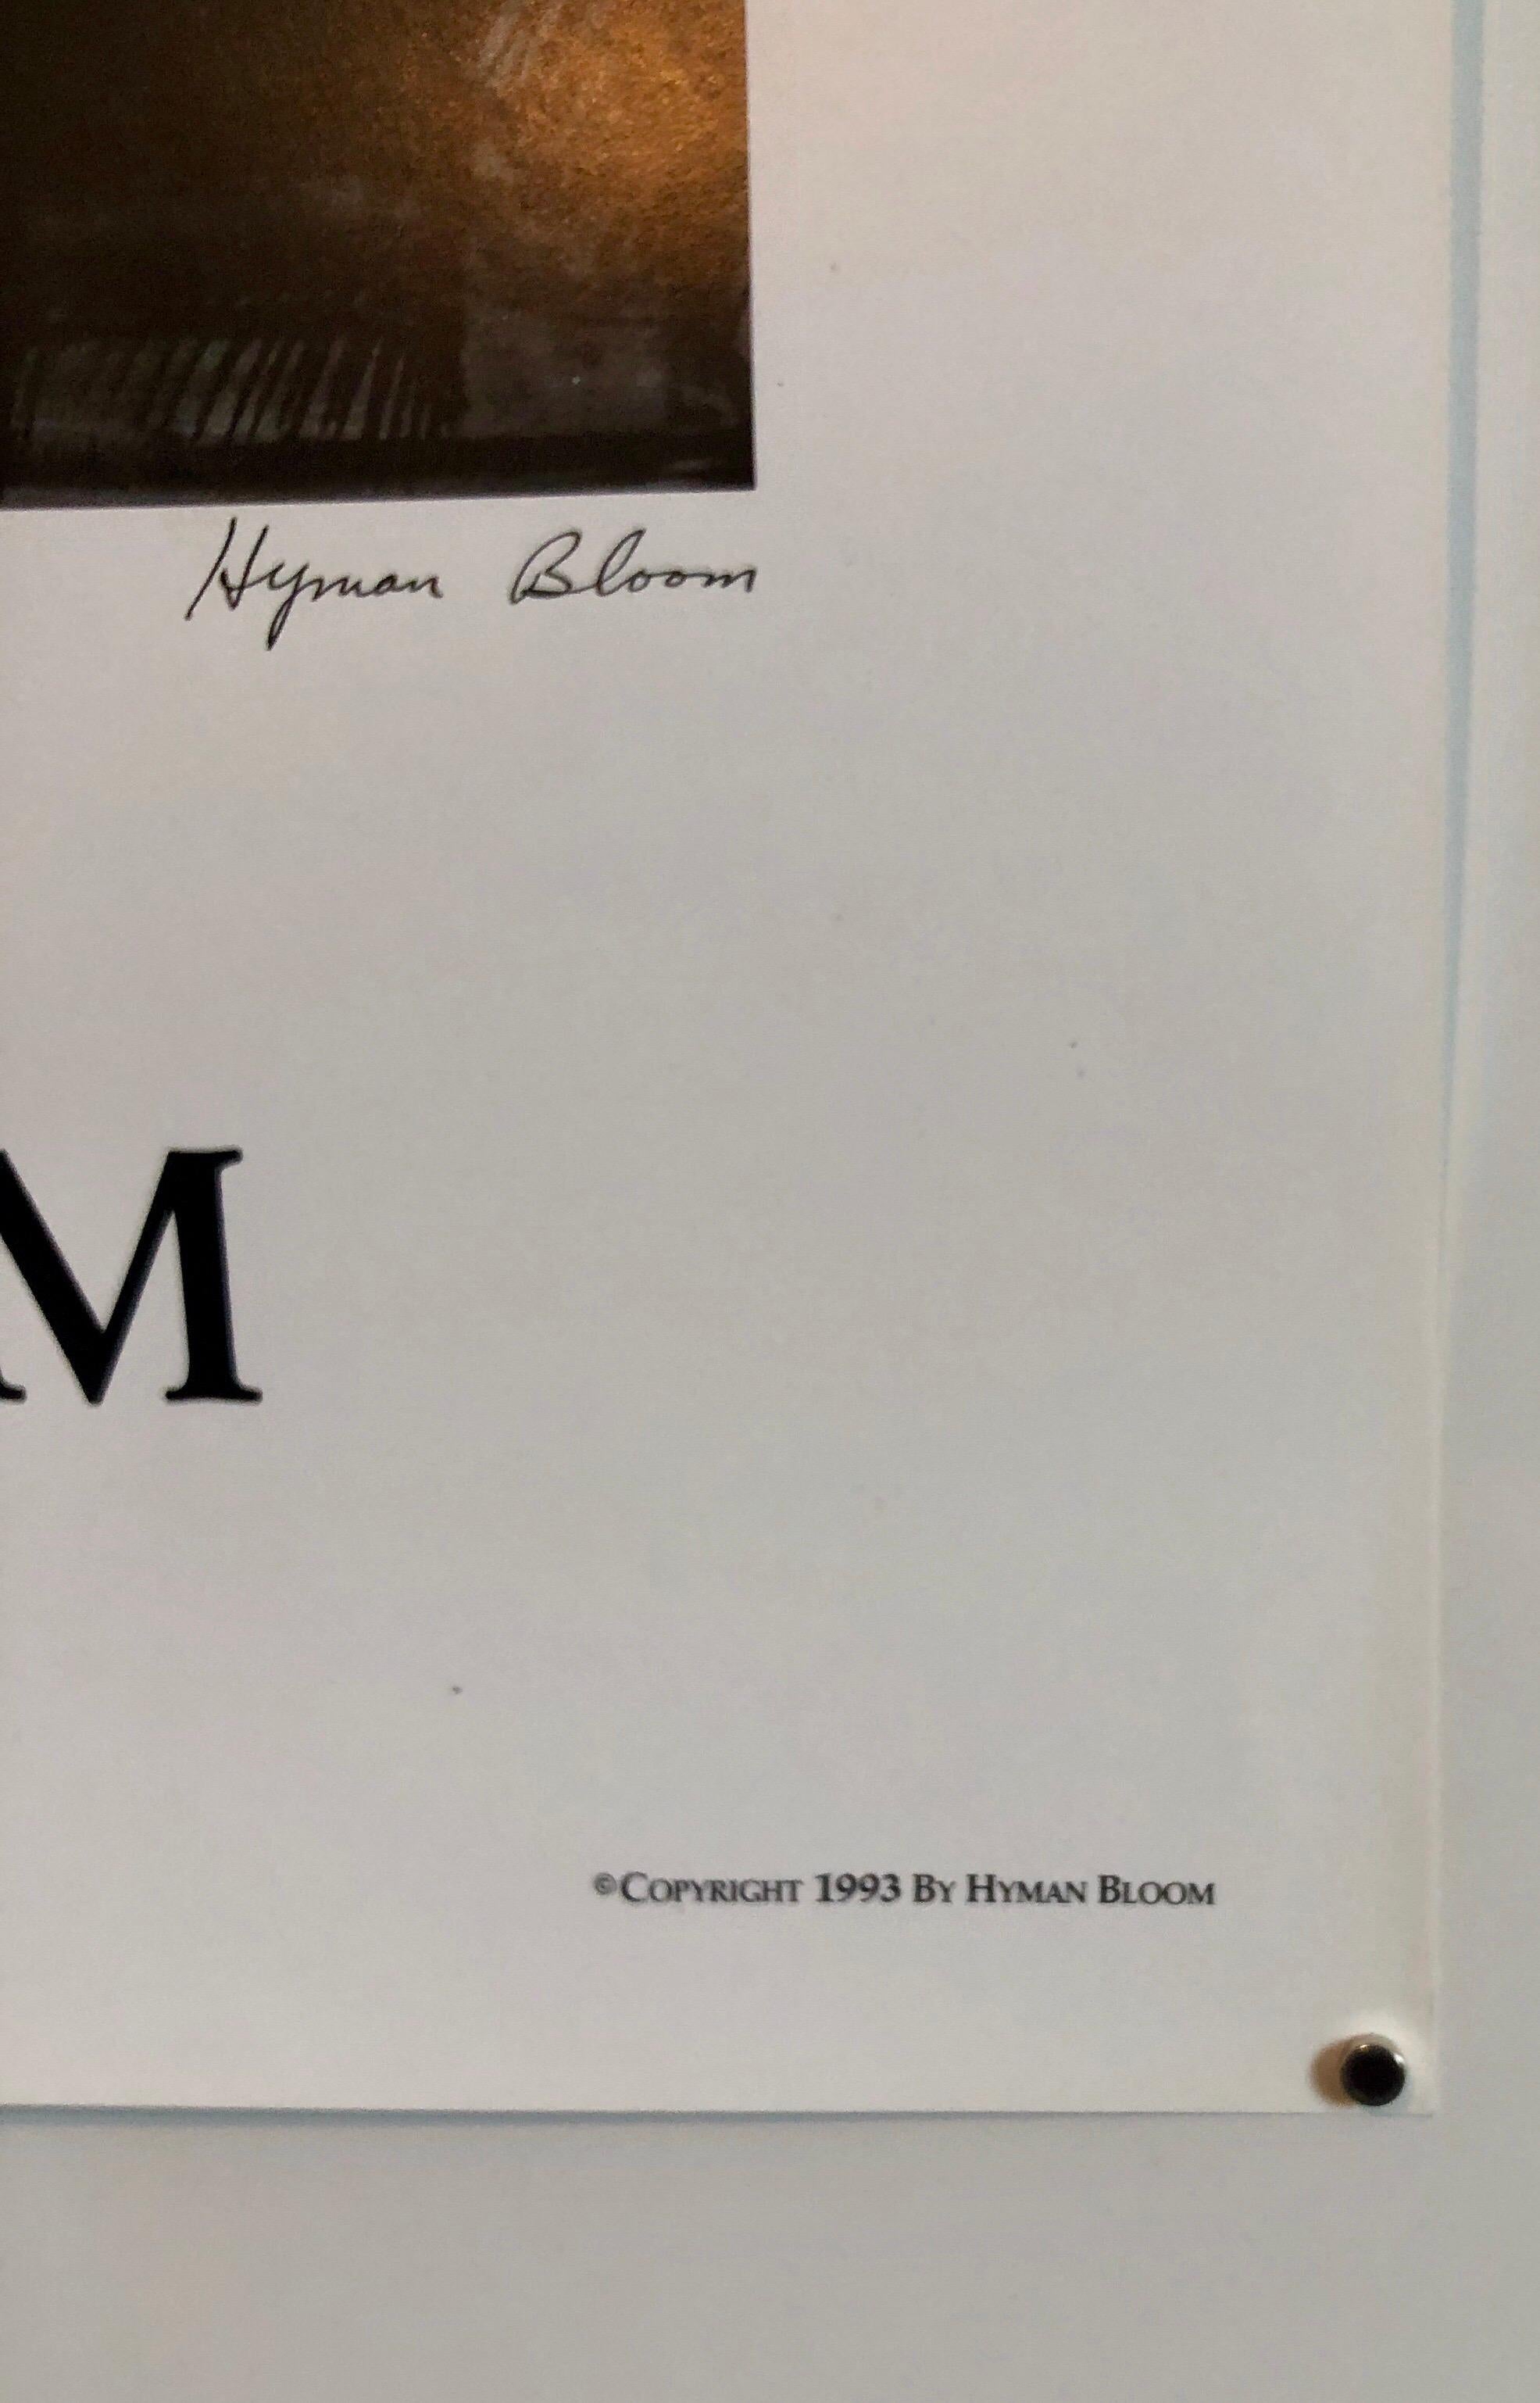 This is not editioned. According to his wife this was done privately for his 80th birthday and just given to friends and family. they were not sold. This is from a group of very few that were hand signed by Hyman Bloom for his close friend the